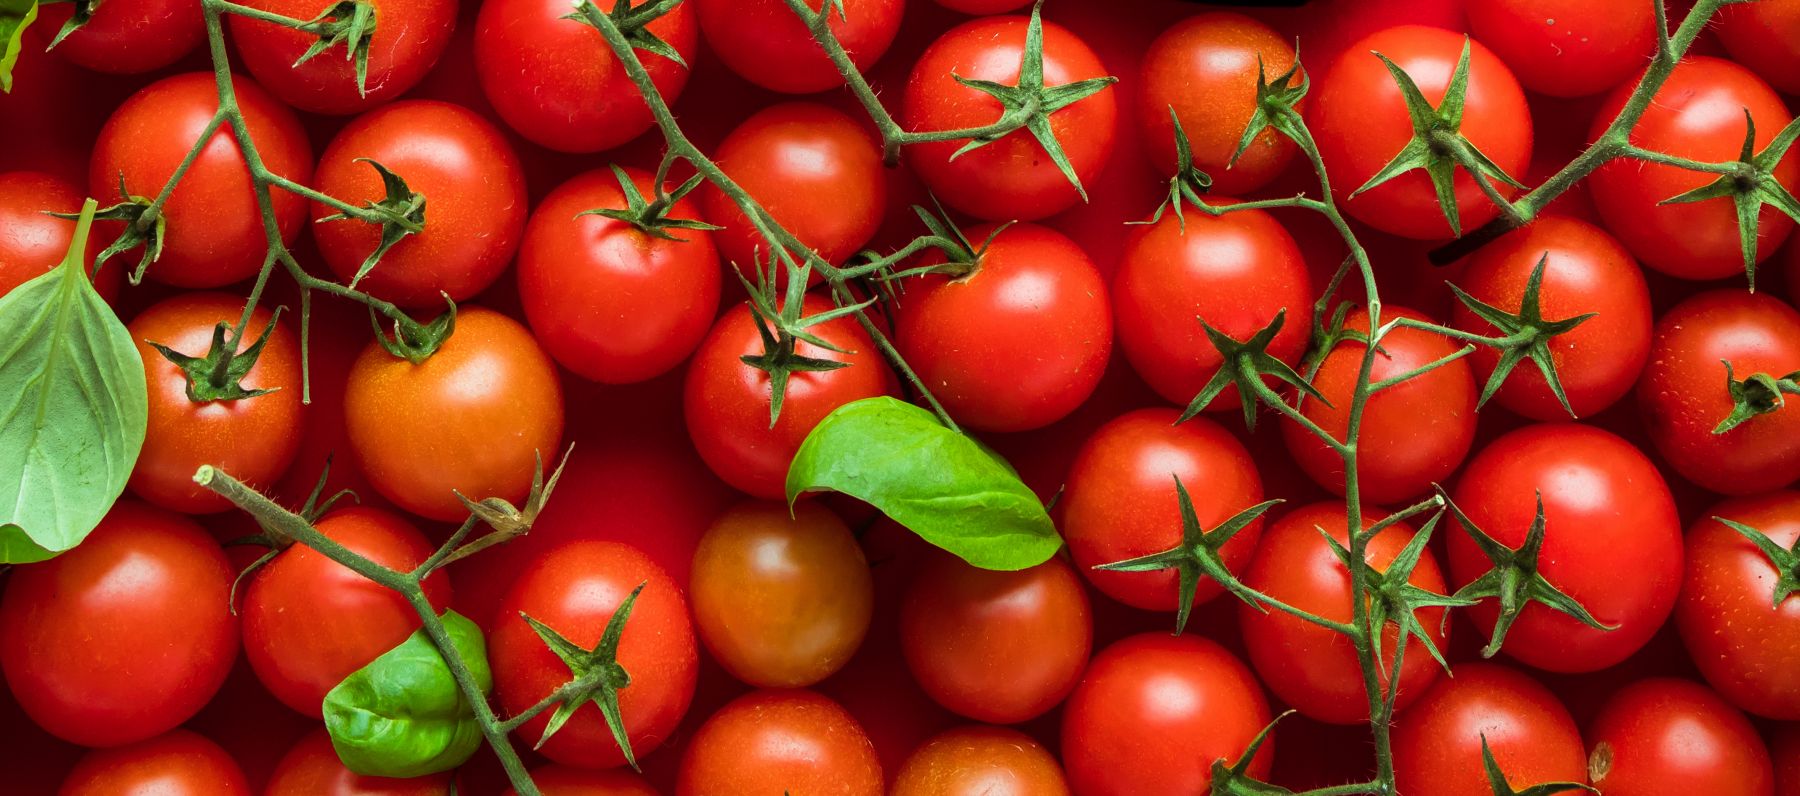 ThinkPlace designer Eliot Duffy says tomatoes might tell a story about the meaning of innovation